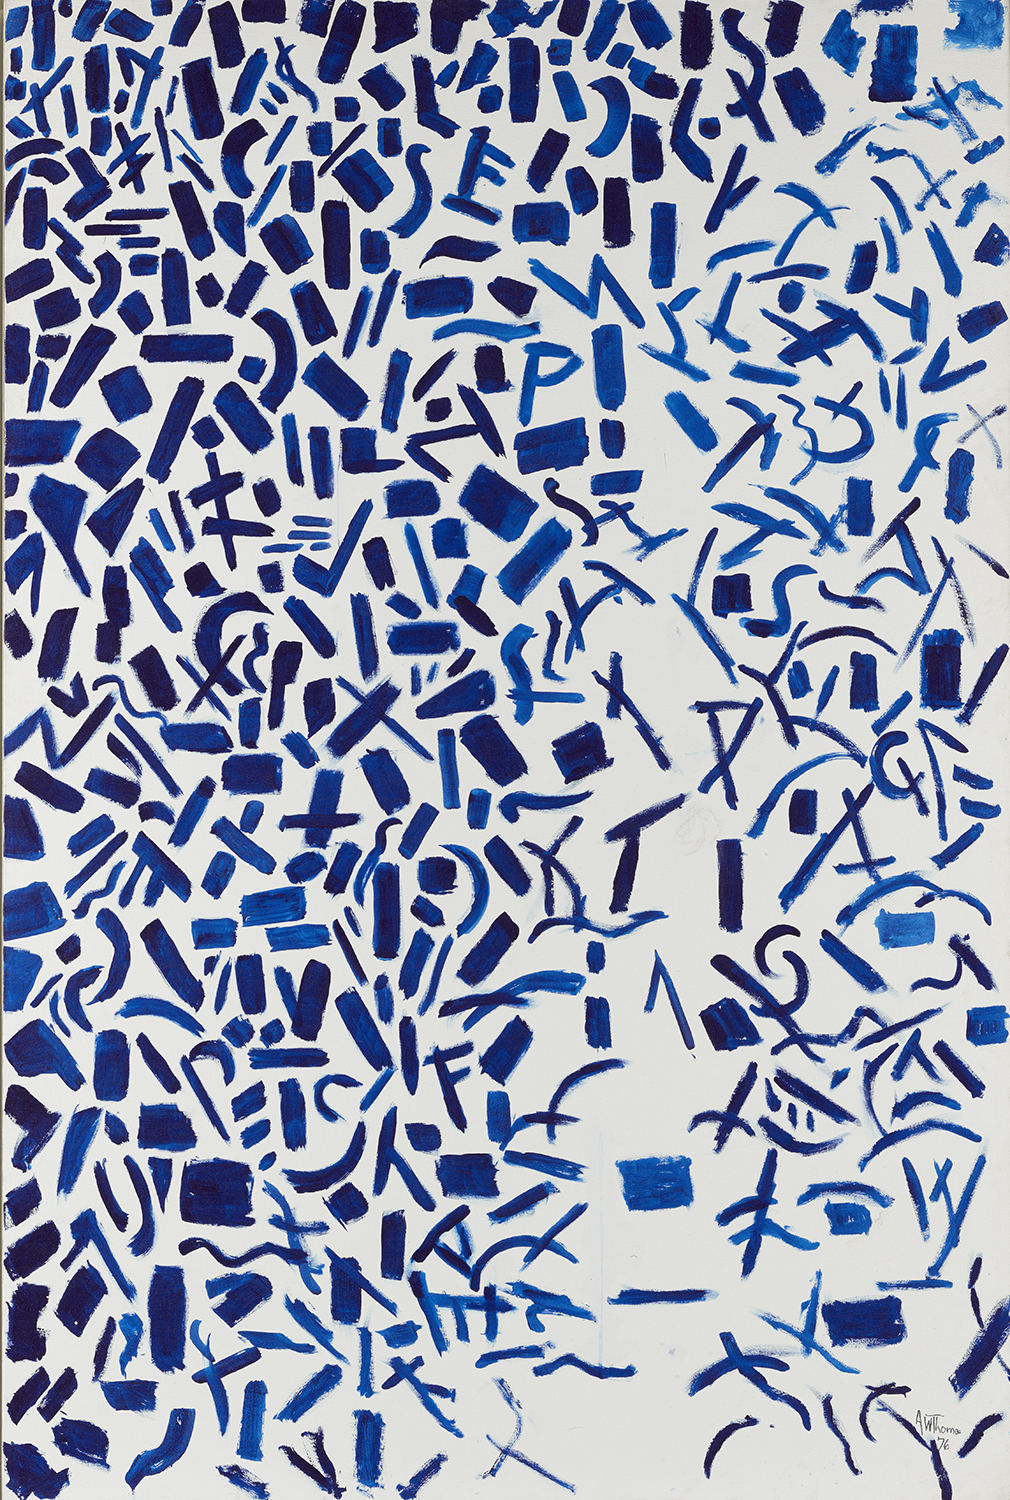 Alma Thomas, Hydrangeas Spring Song, 1976, acrylic on canvas, 78 x 48 inches. Philadelphia Museum of Art, 125th Anniversary Acquisition. Purchased with funds contributed by Mr. and Mrs. Julius Rosenwald II in honor of René and Sarah Carr d’Harnoncourt, The Judith Rothschild Foundation, and with other funds being raised in honor of the 125th Anniversary of the Museum and in celebration of African American art, 2002-20-1.